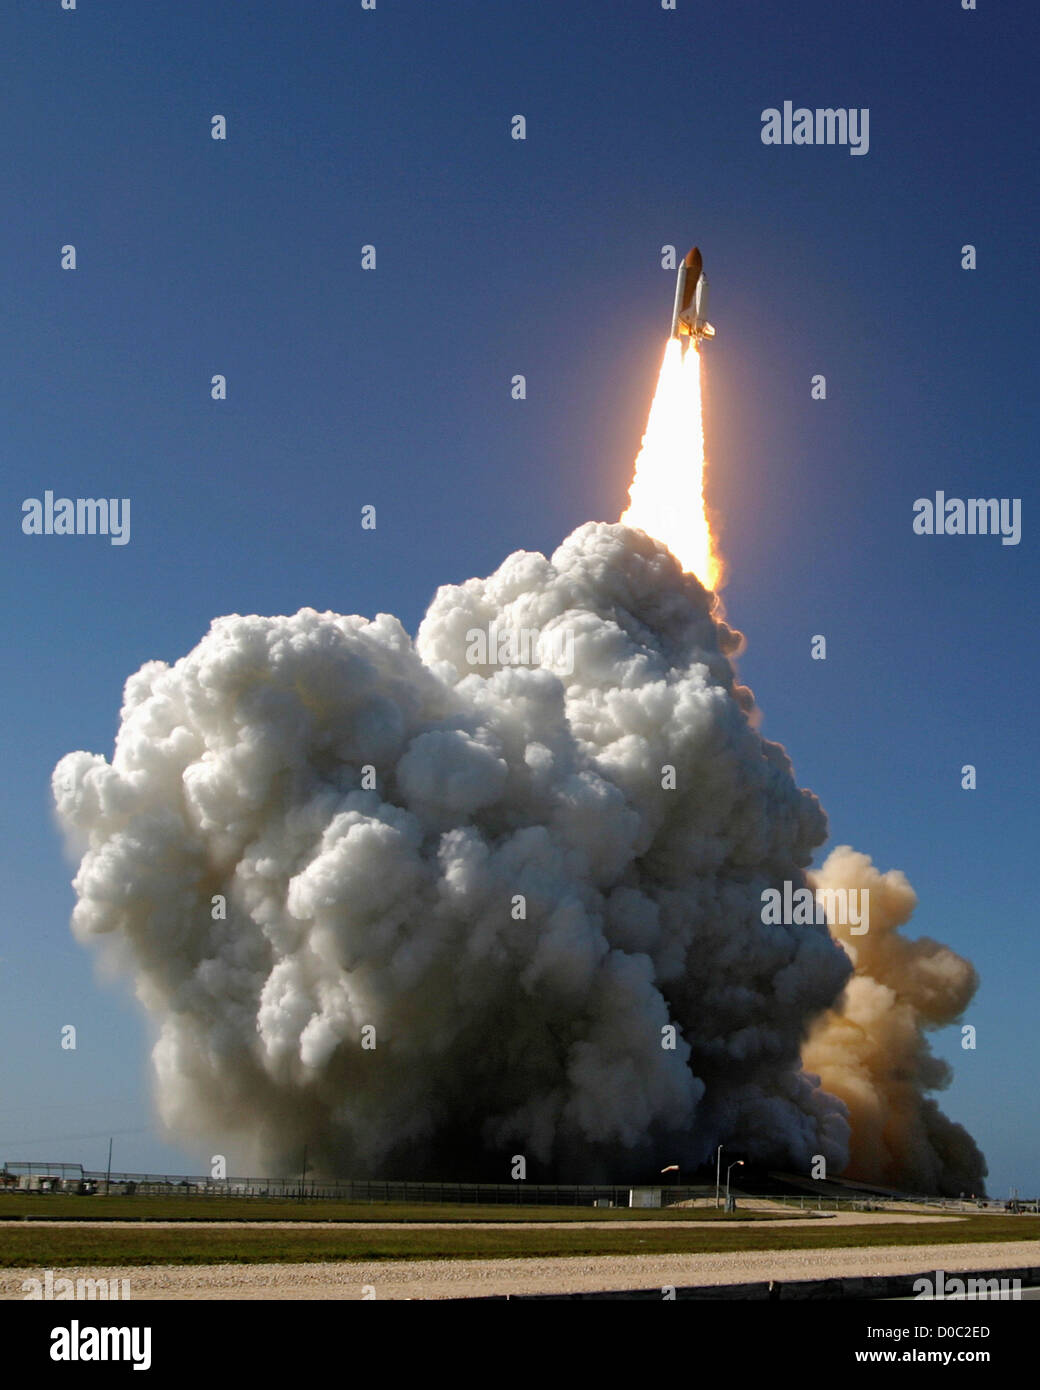 The Space Shuttle Discovery launches on STS-124 to the International Space Station, May 31, 2008 at 5:02pm EDT. Stock Photo